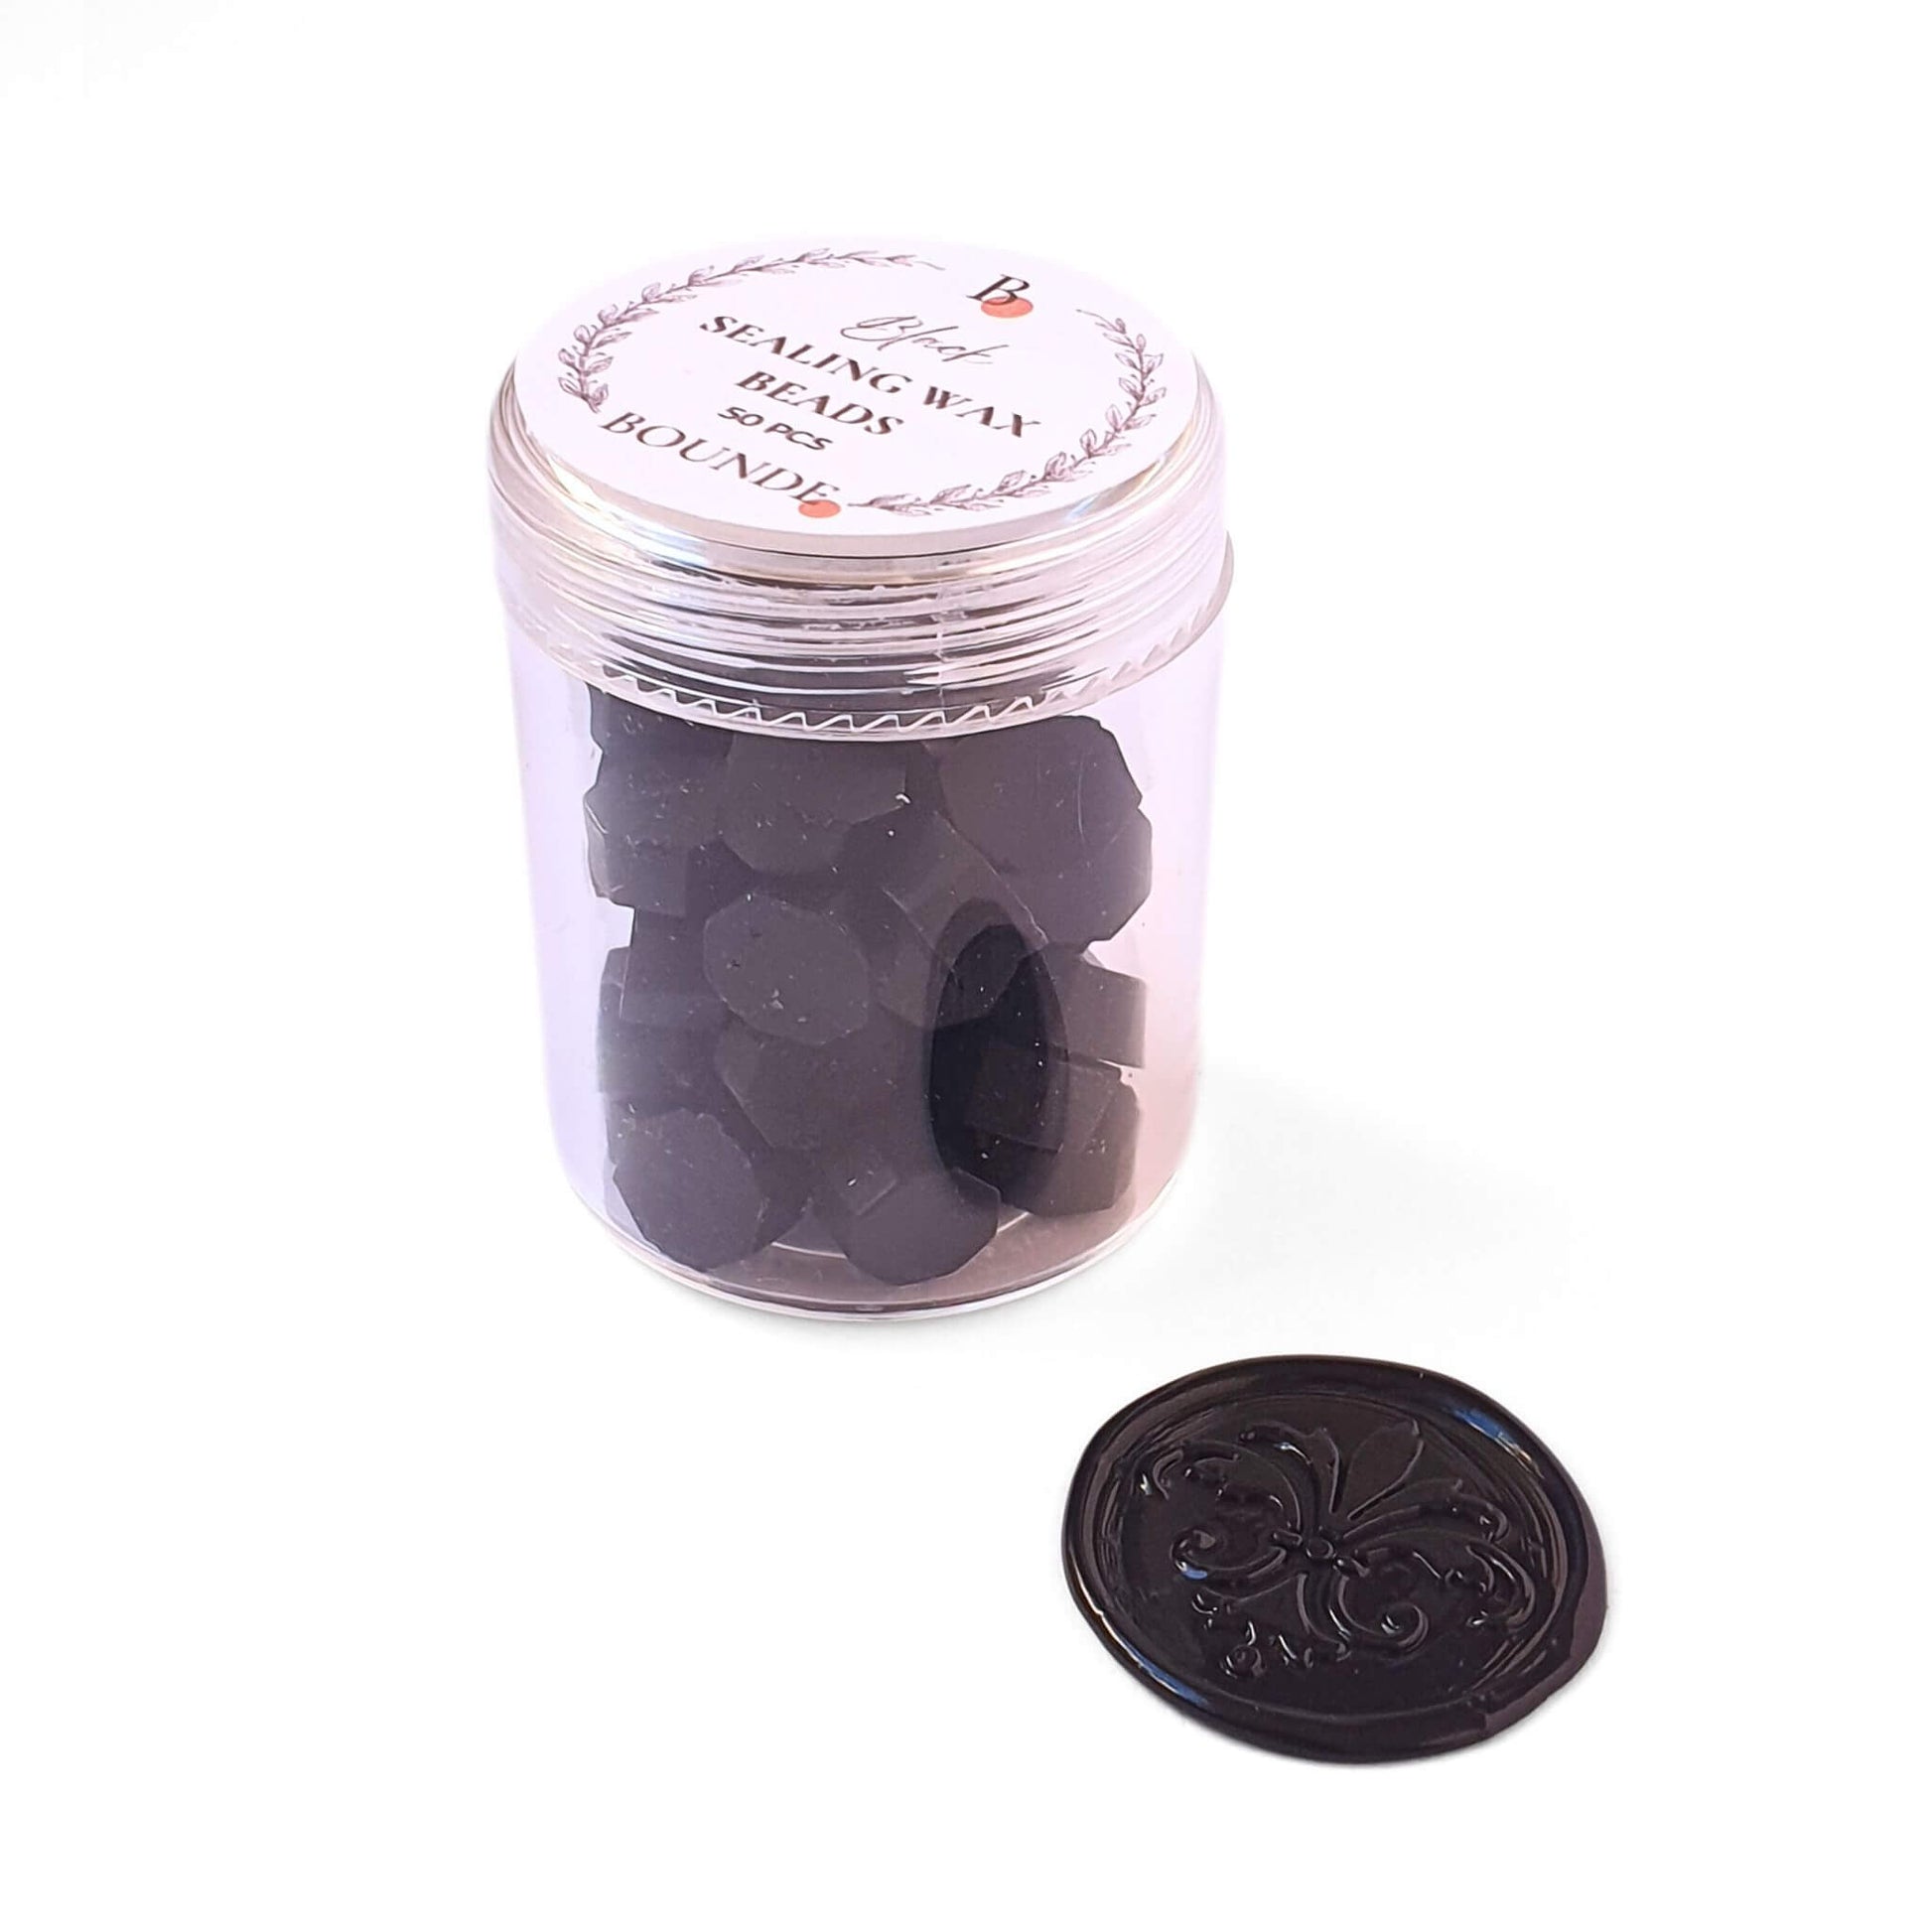 jar of black sealing wax beads and a black wax seal stamp next to it.